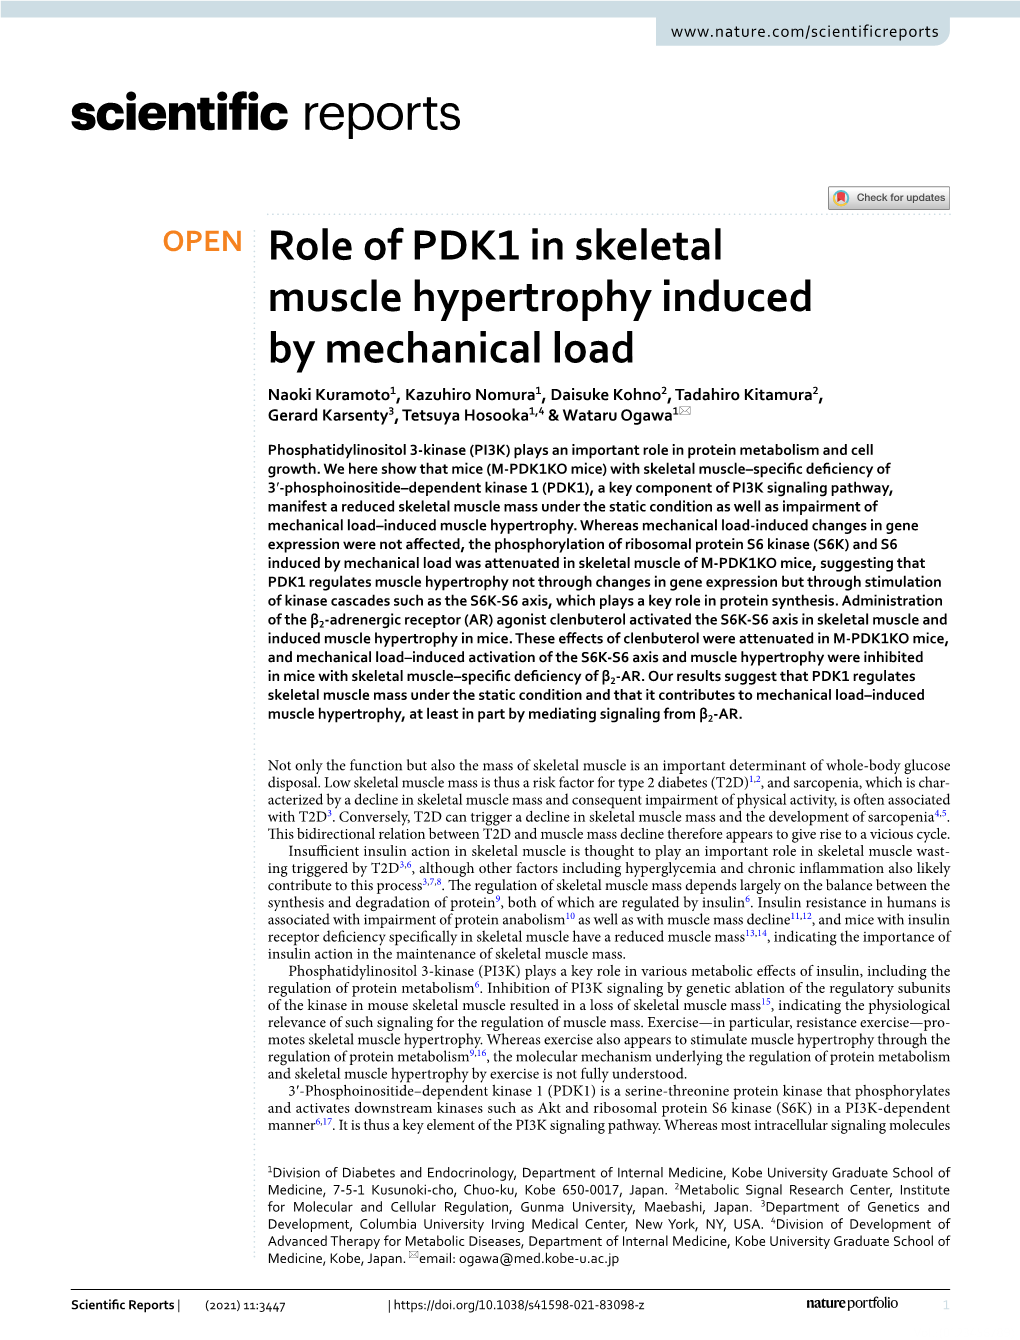 Role of PDK1 in Skeletal Muscle Hypertrophy Induced by Mechanical